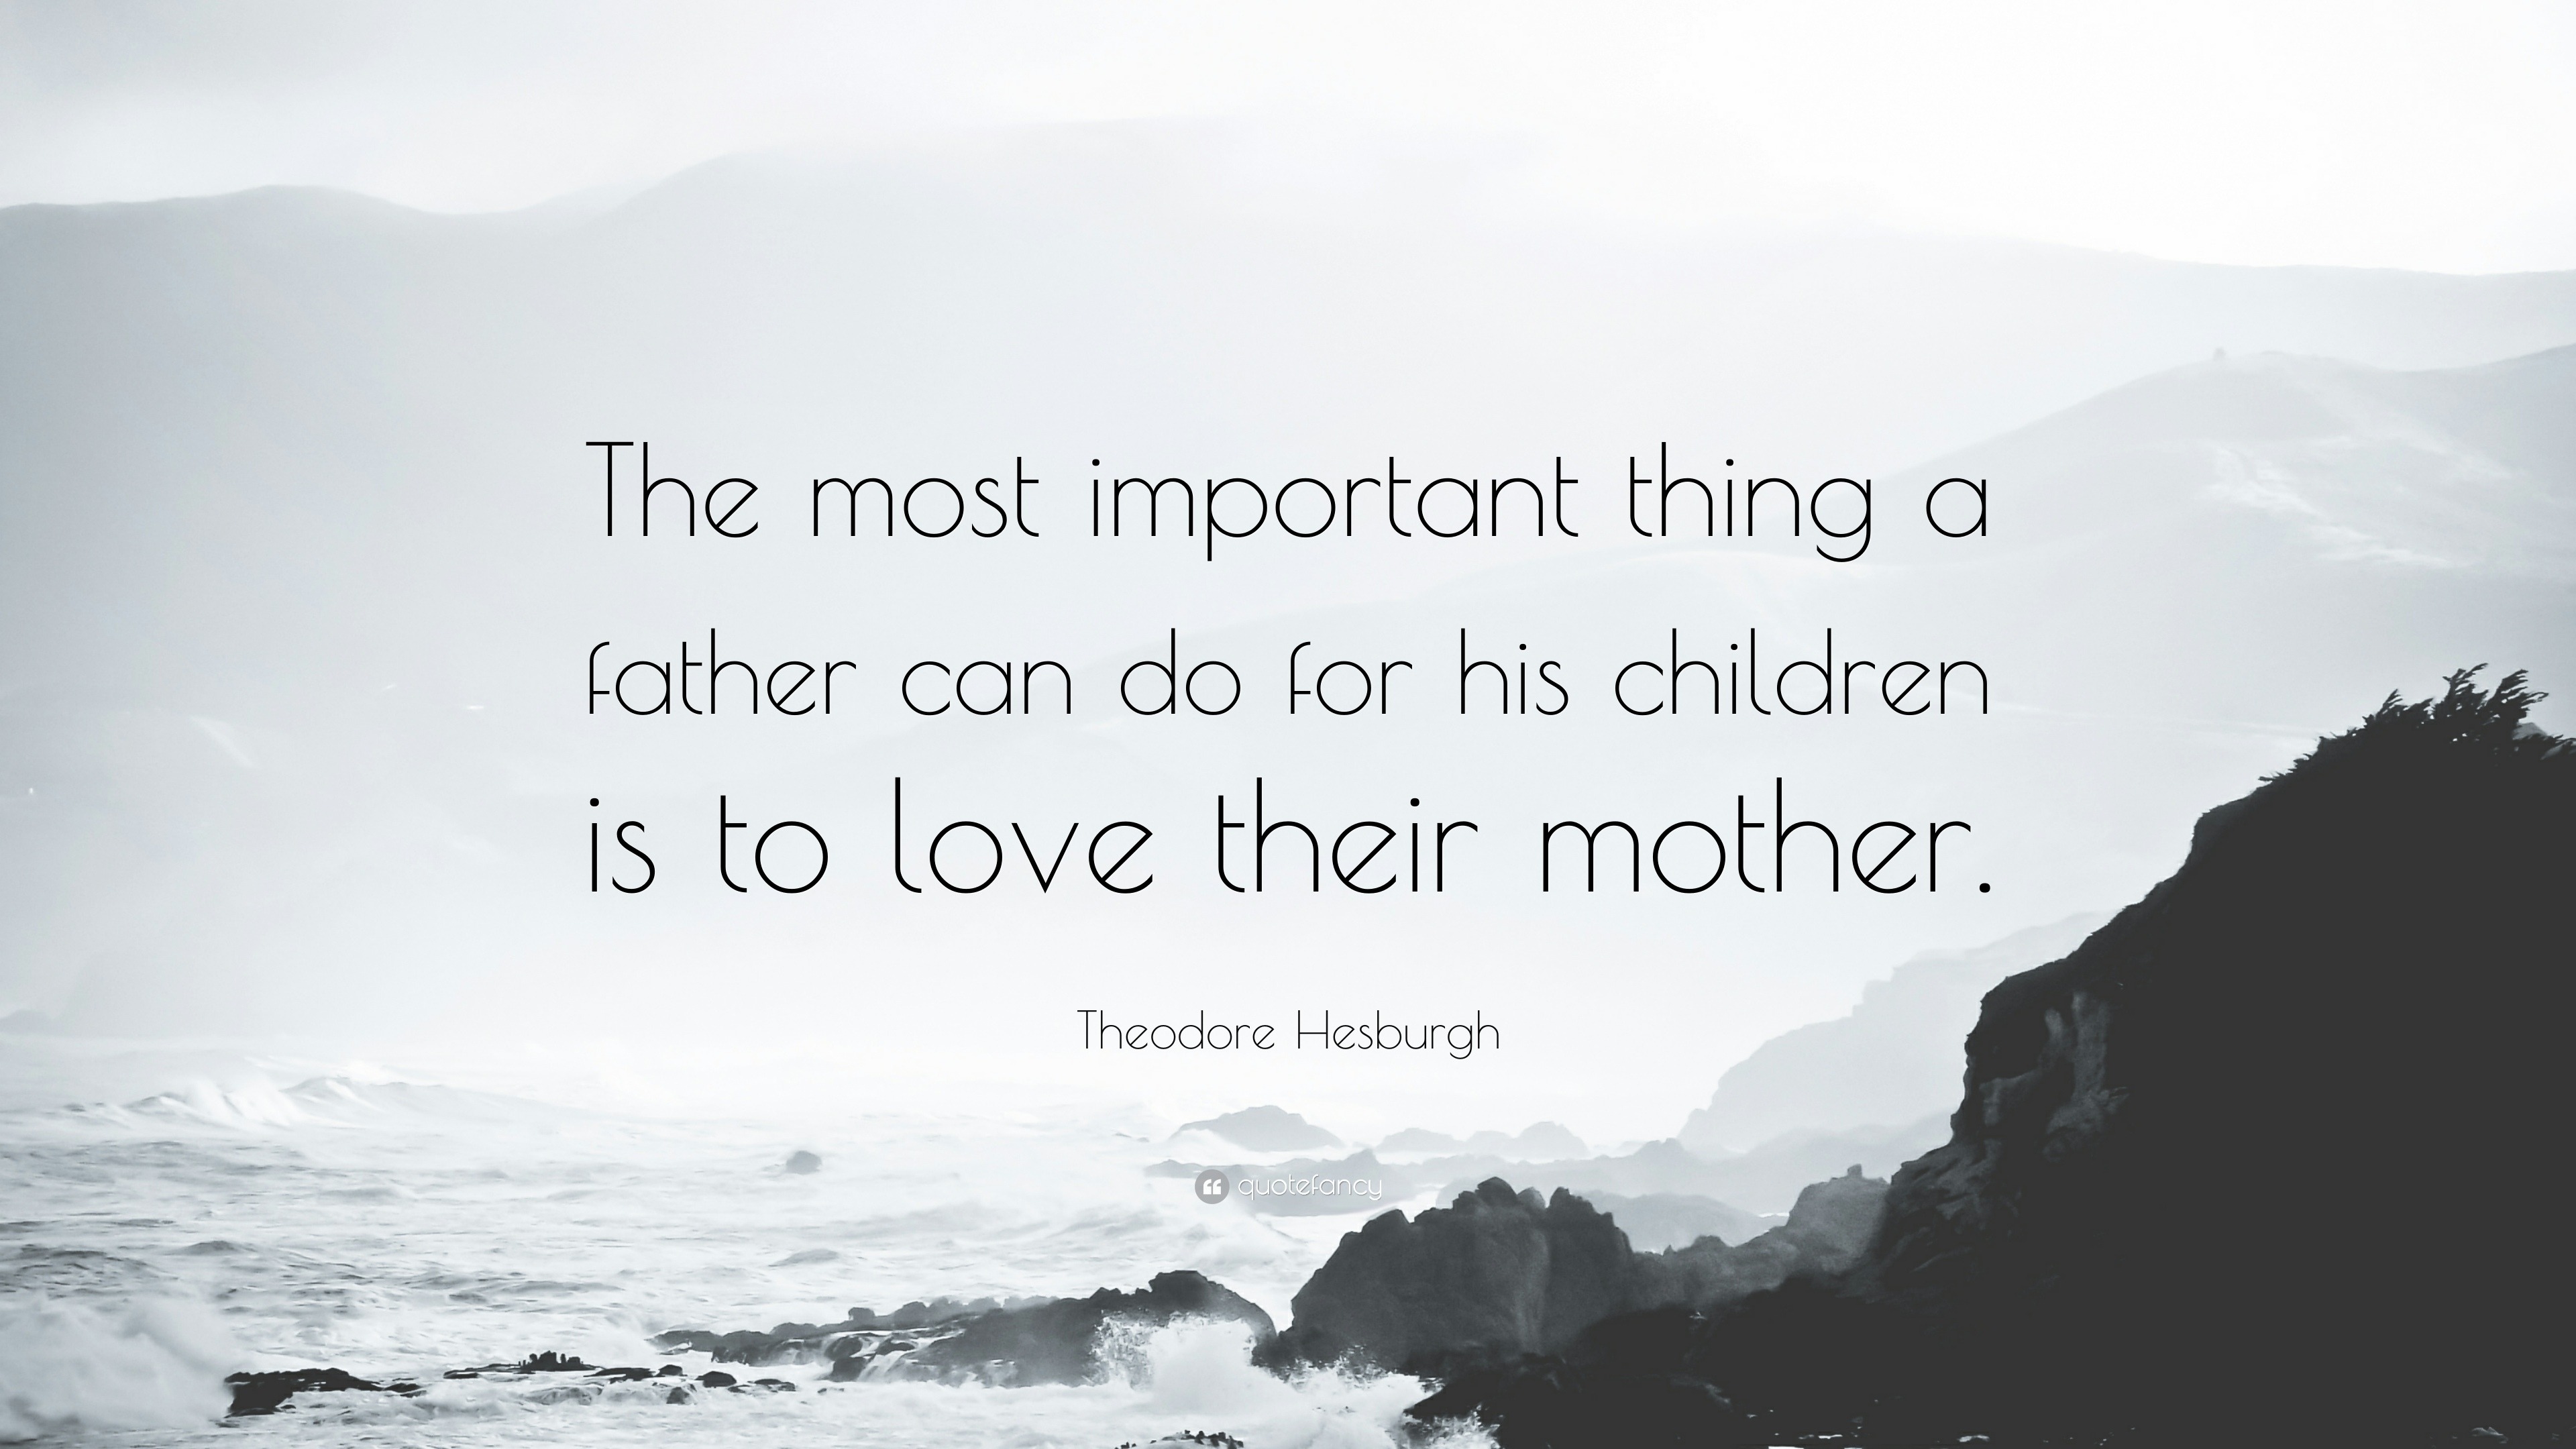 Theodore Hesburgh Quote “The most important thing a father can do for his children